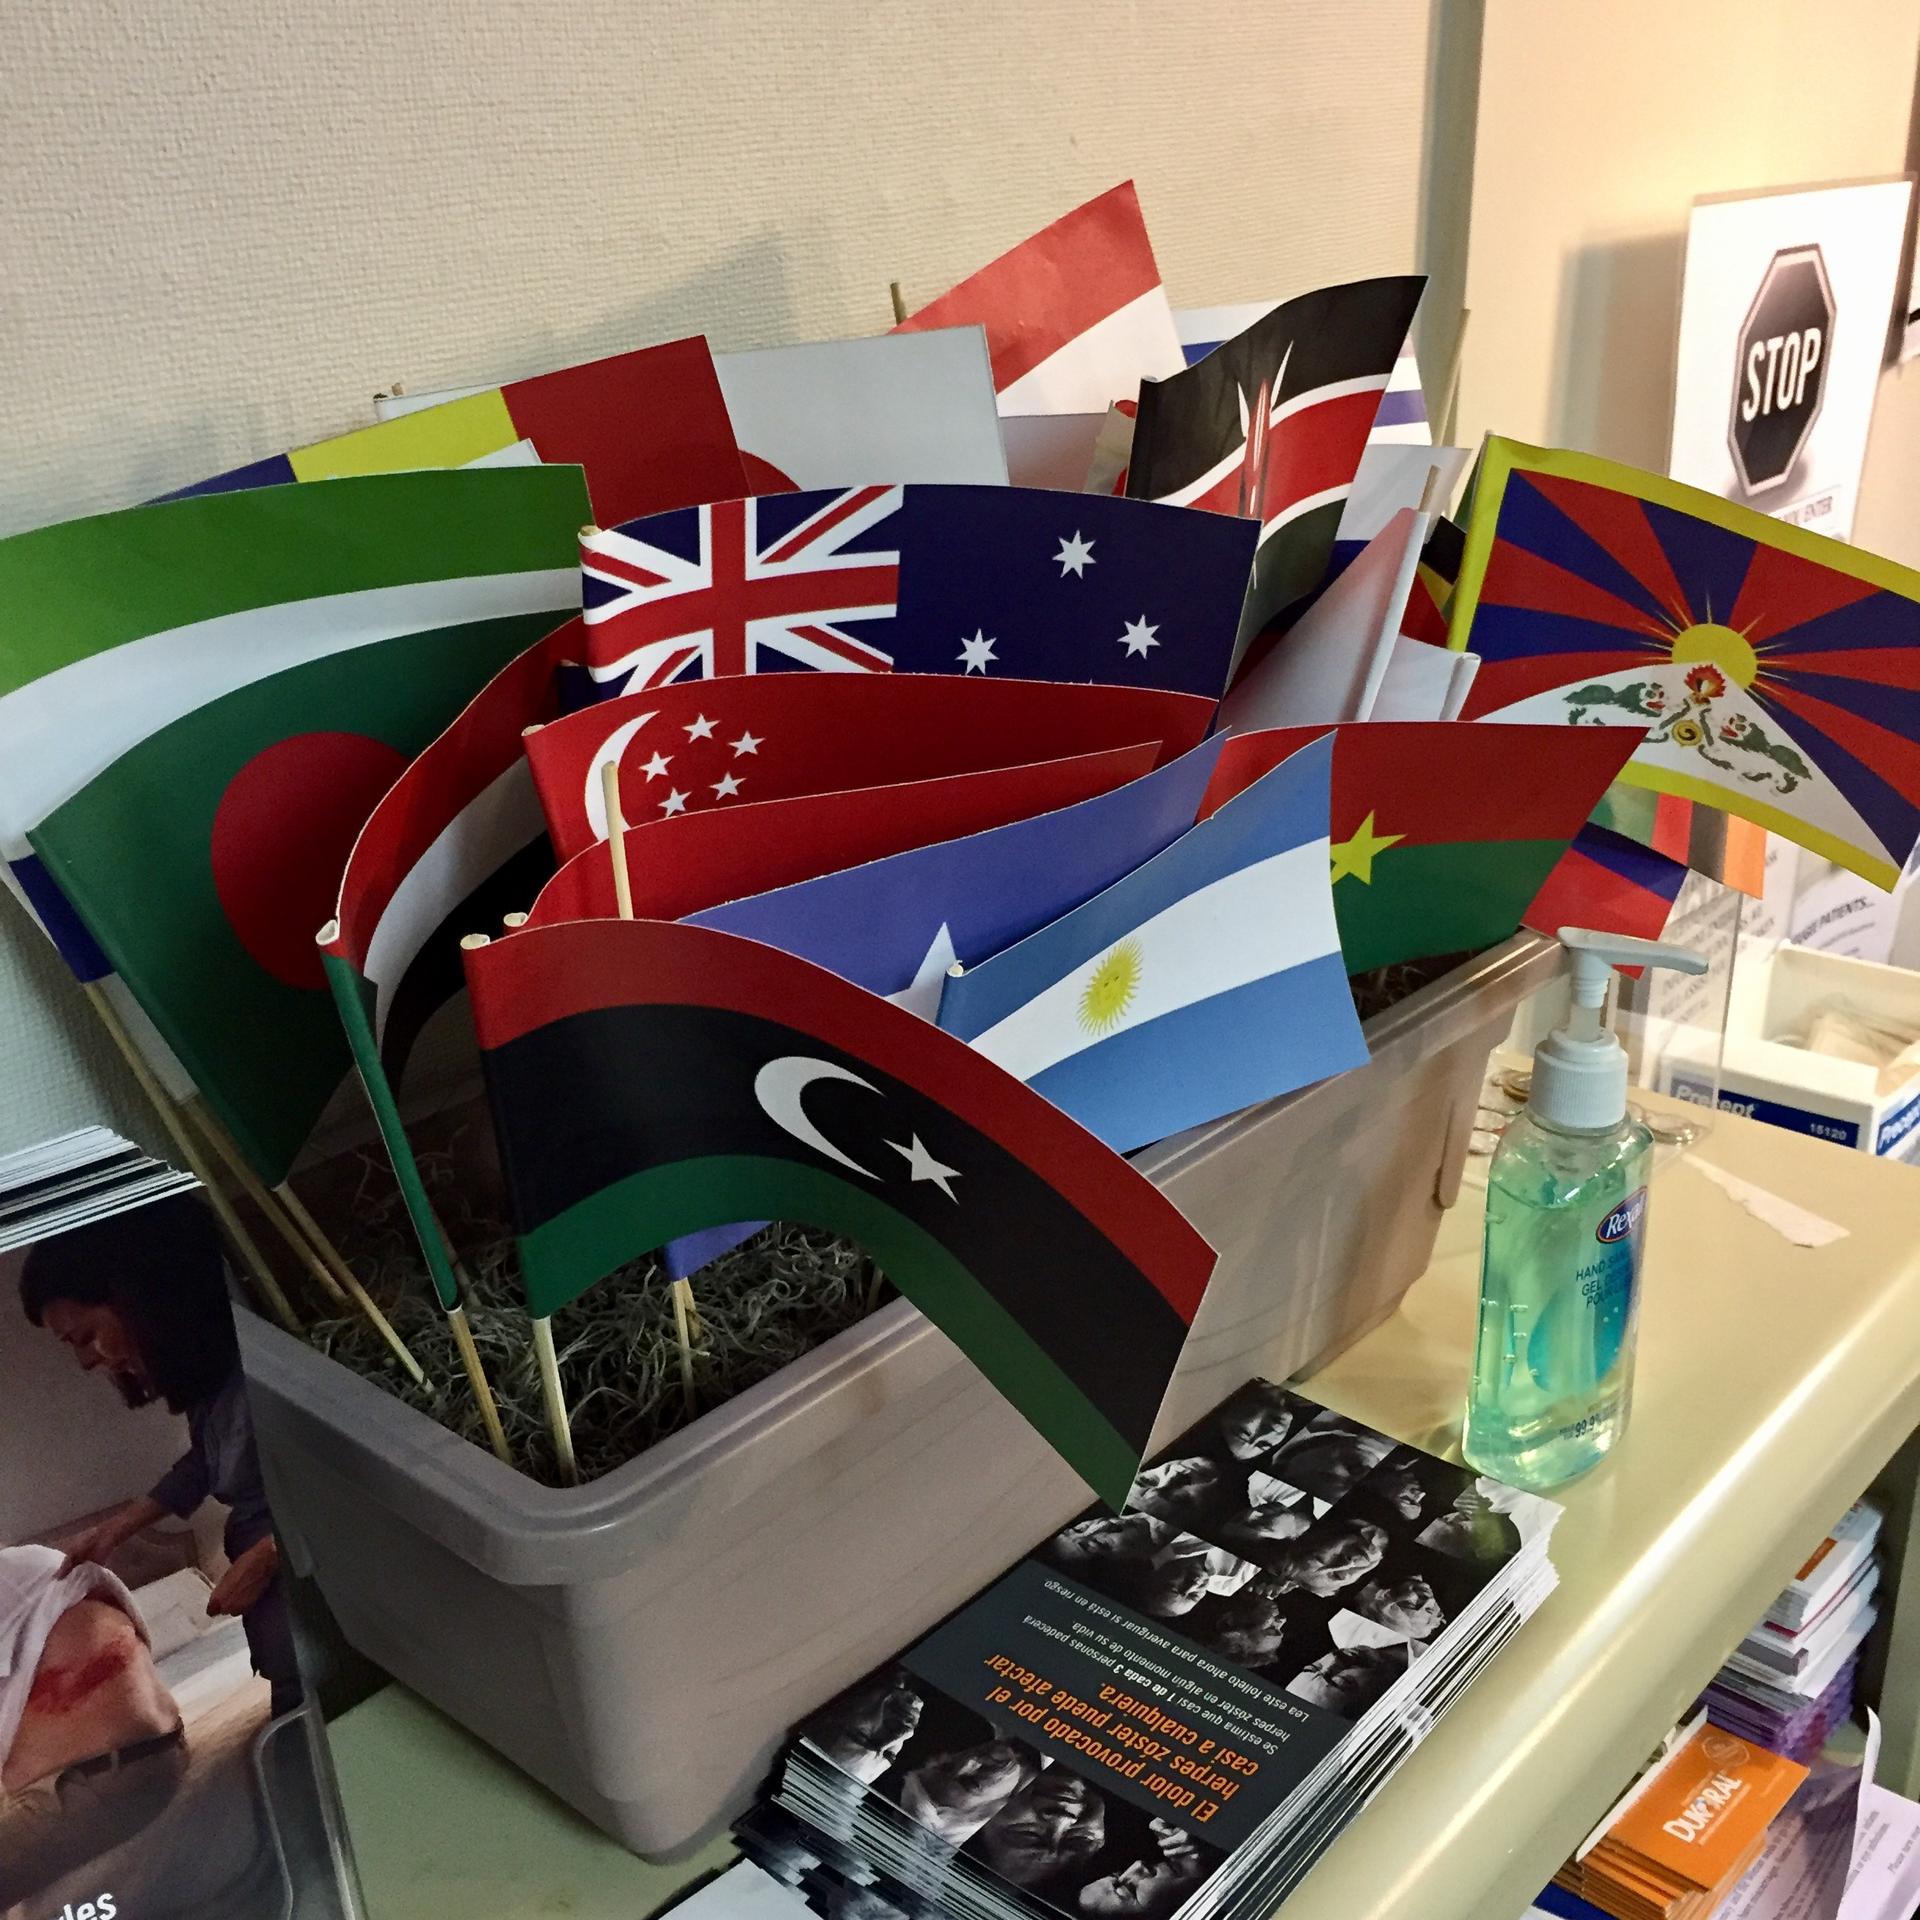 Flags represent some of the home countries of the patients at the clinic.